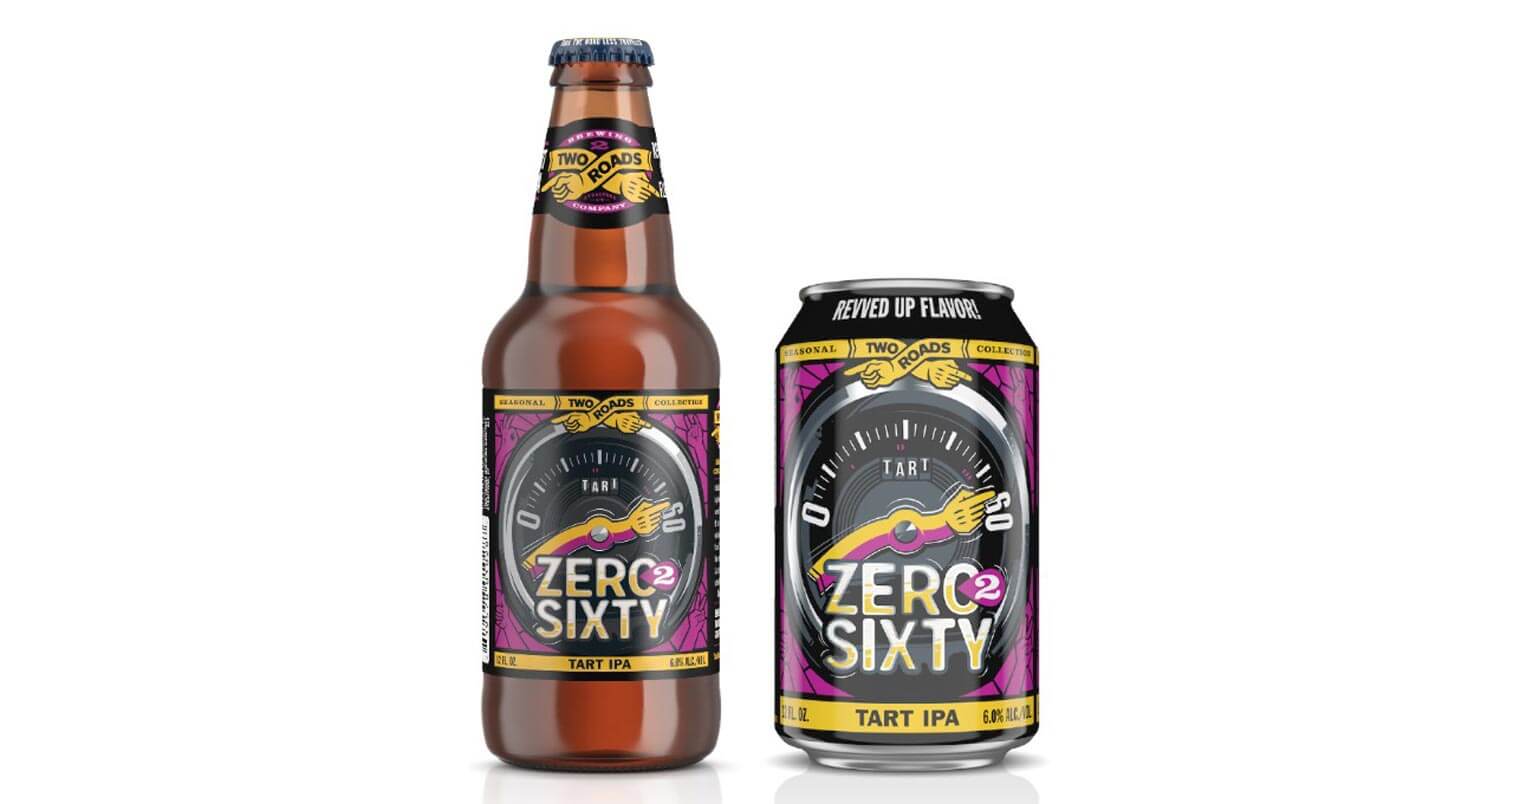 Two Roads Brewing Launches Zero 2 Sixty Tart IPA, featured image